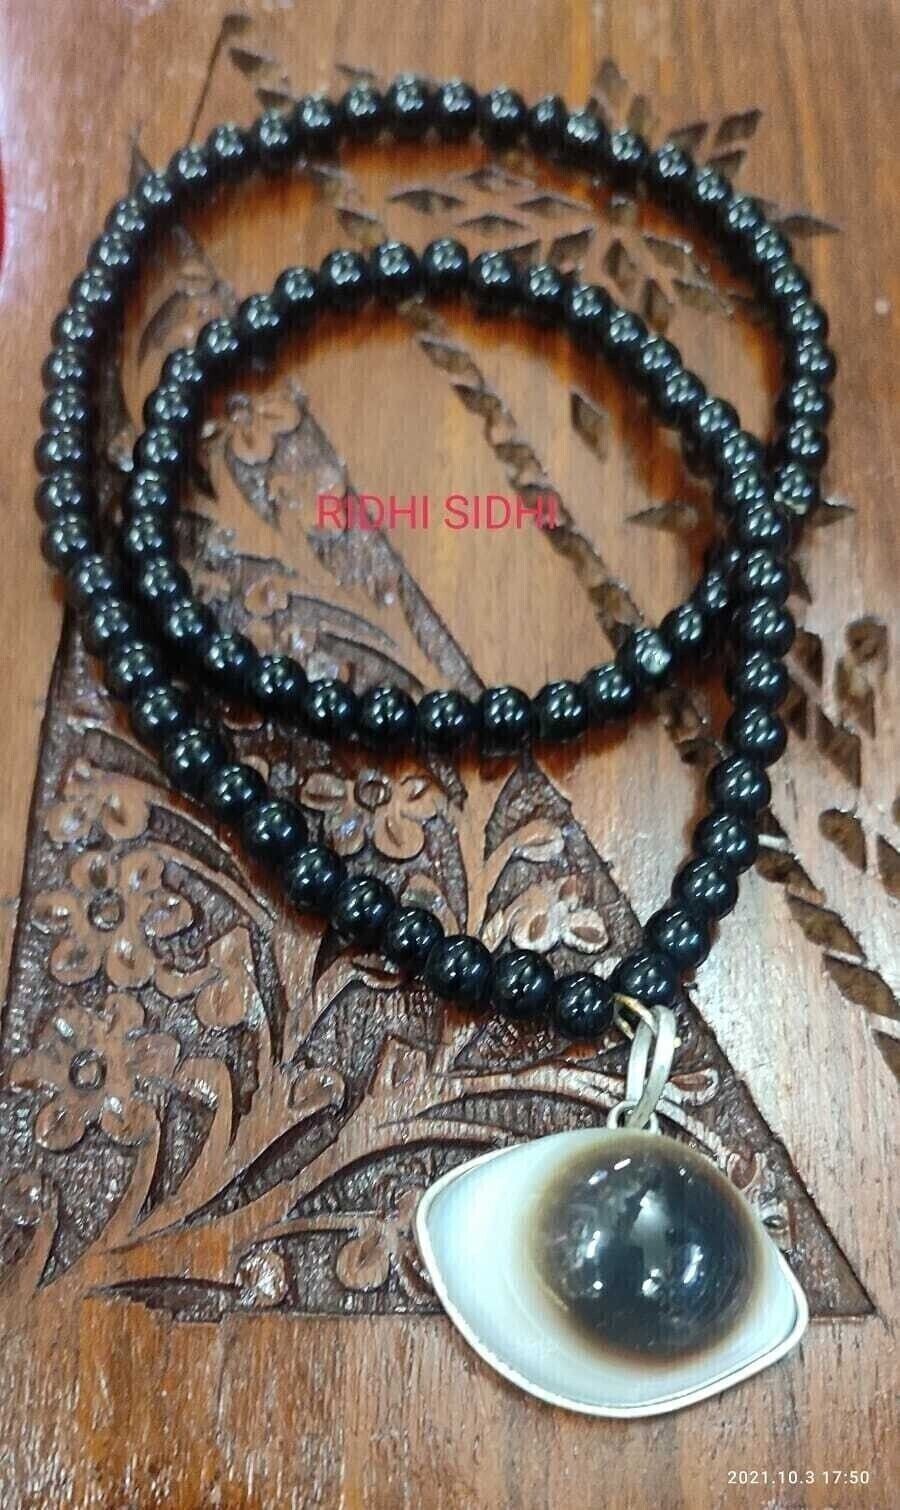 Aghori Made Pendant Uncrossing Enemy Protection Evil Eye Amulet End Curses++